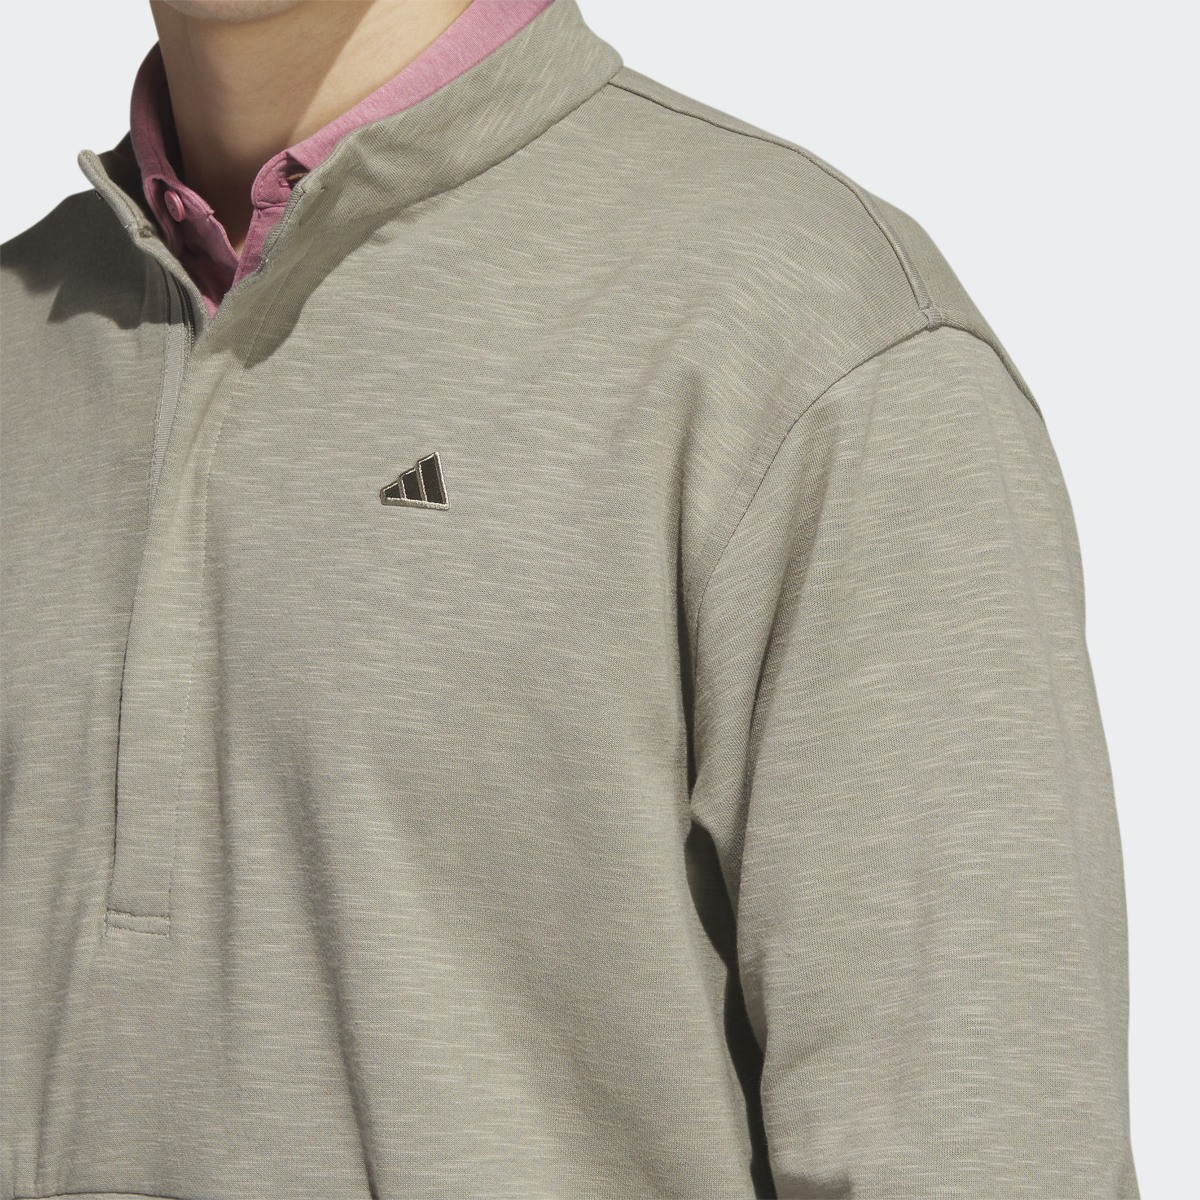 Adidas Go-To 1/2-Zip Pullover. 7